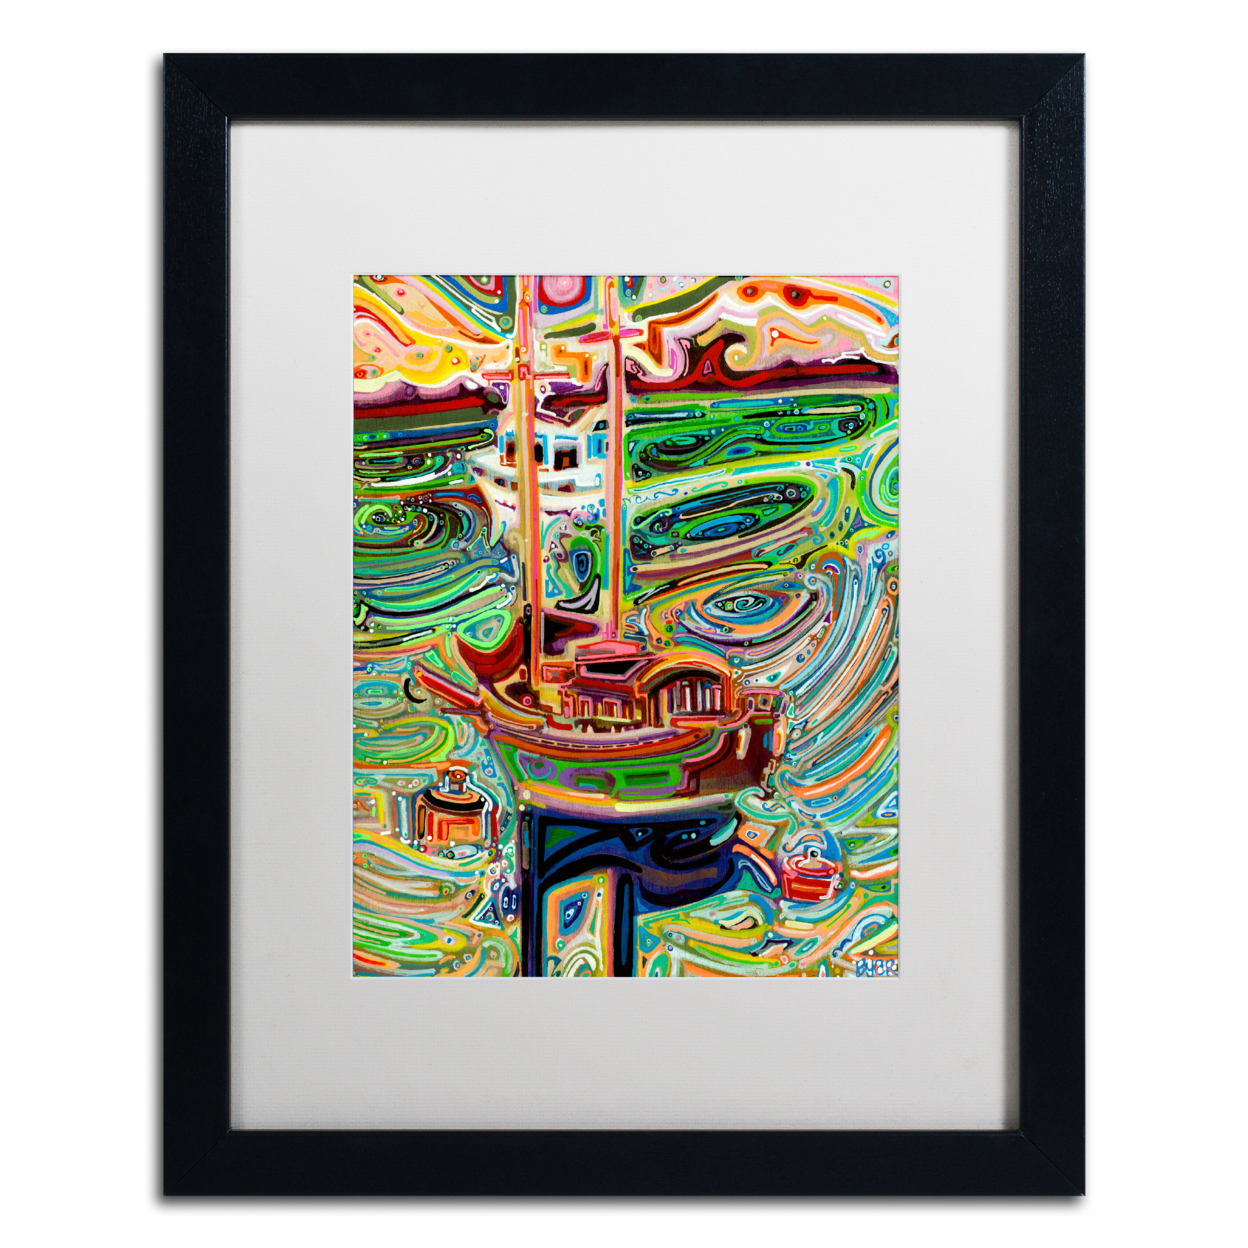 Josh Byer 'Sailing To Tofino' Black Wooden Framed Art 18 X 22 Inches